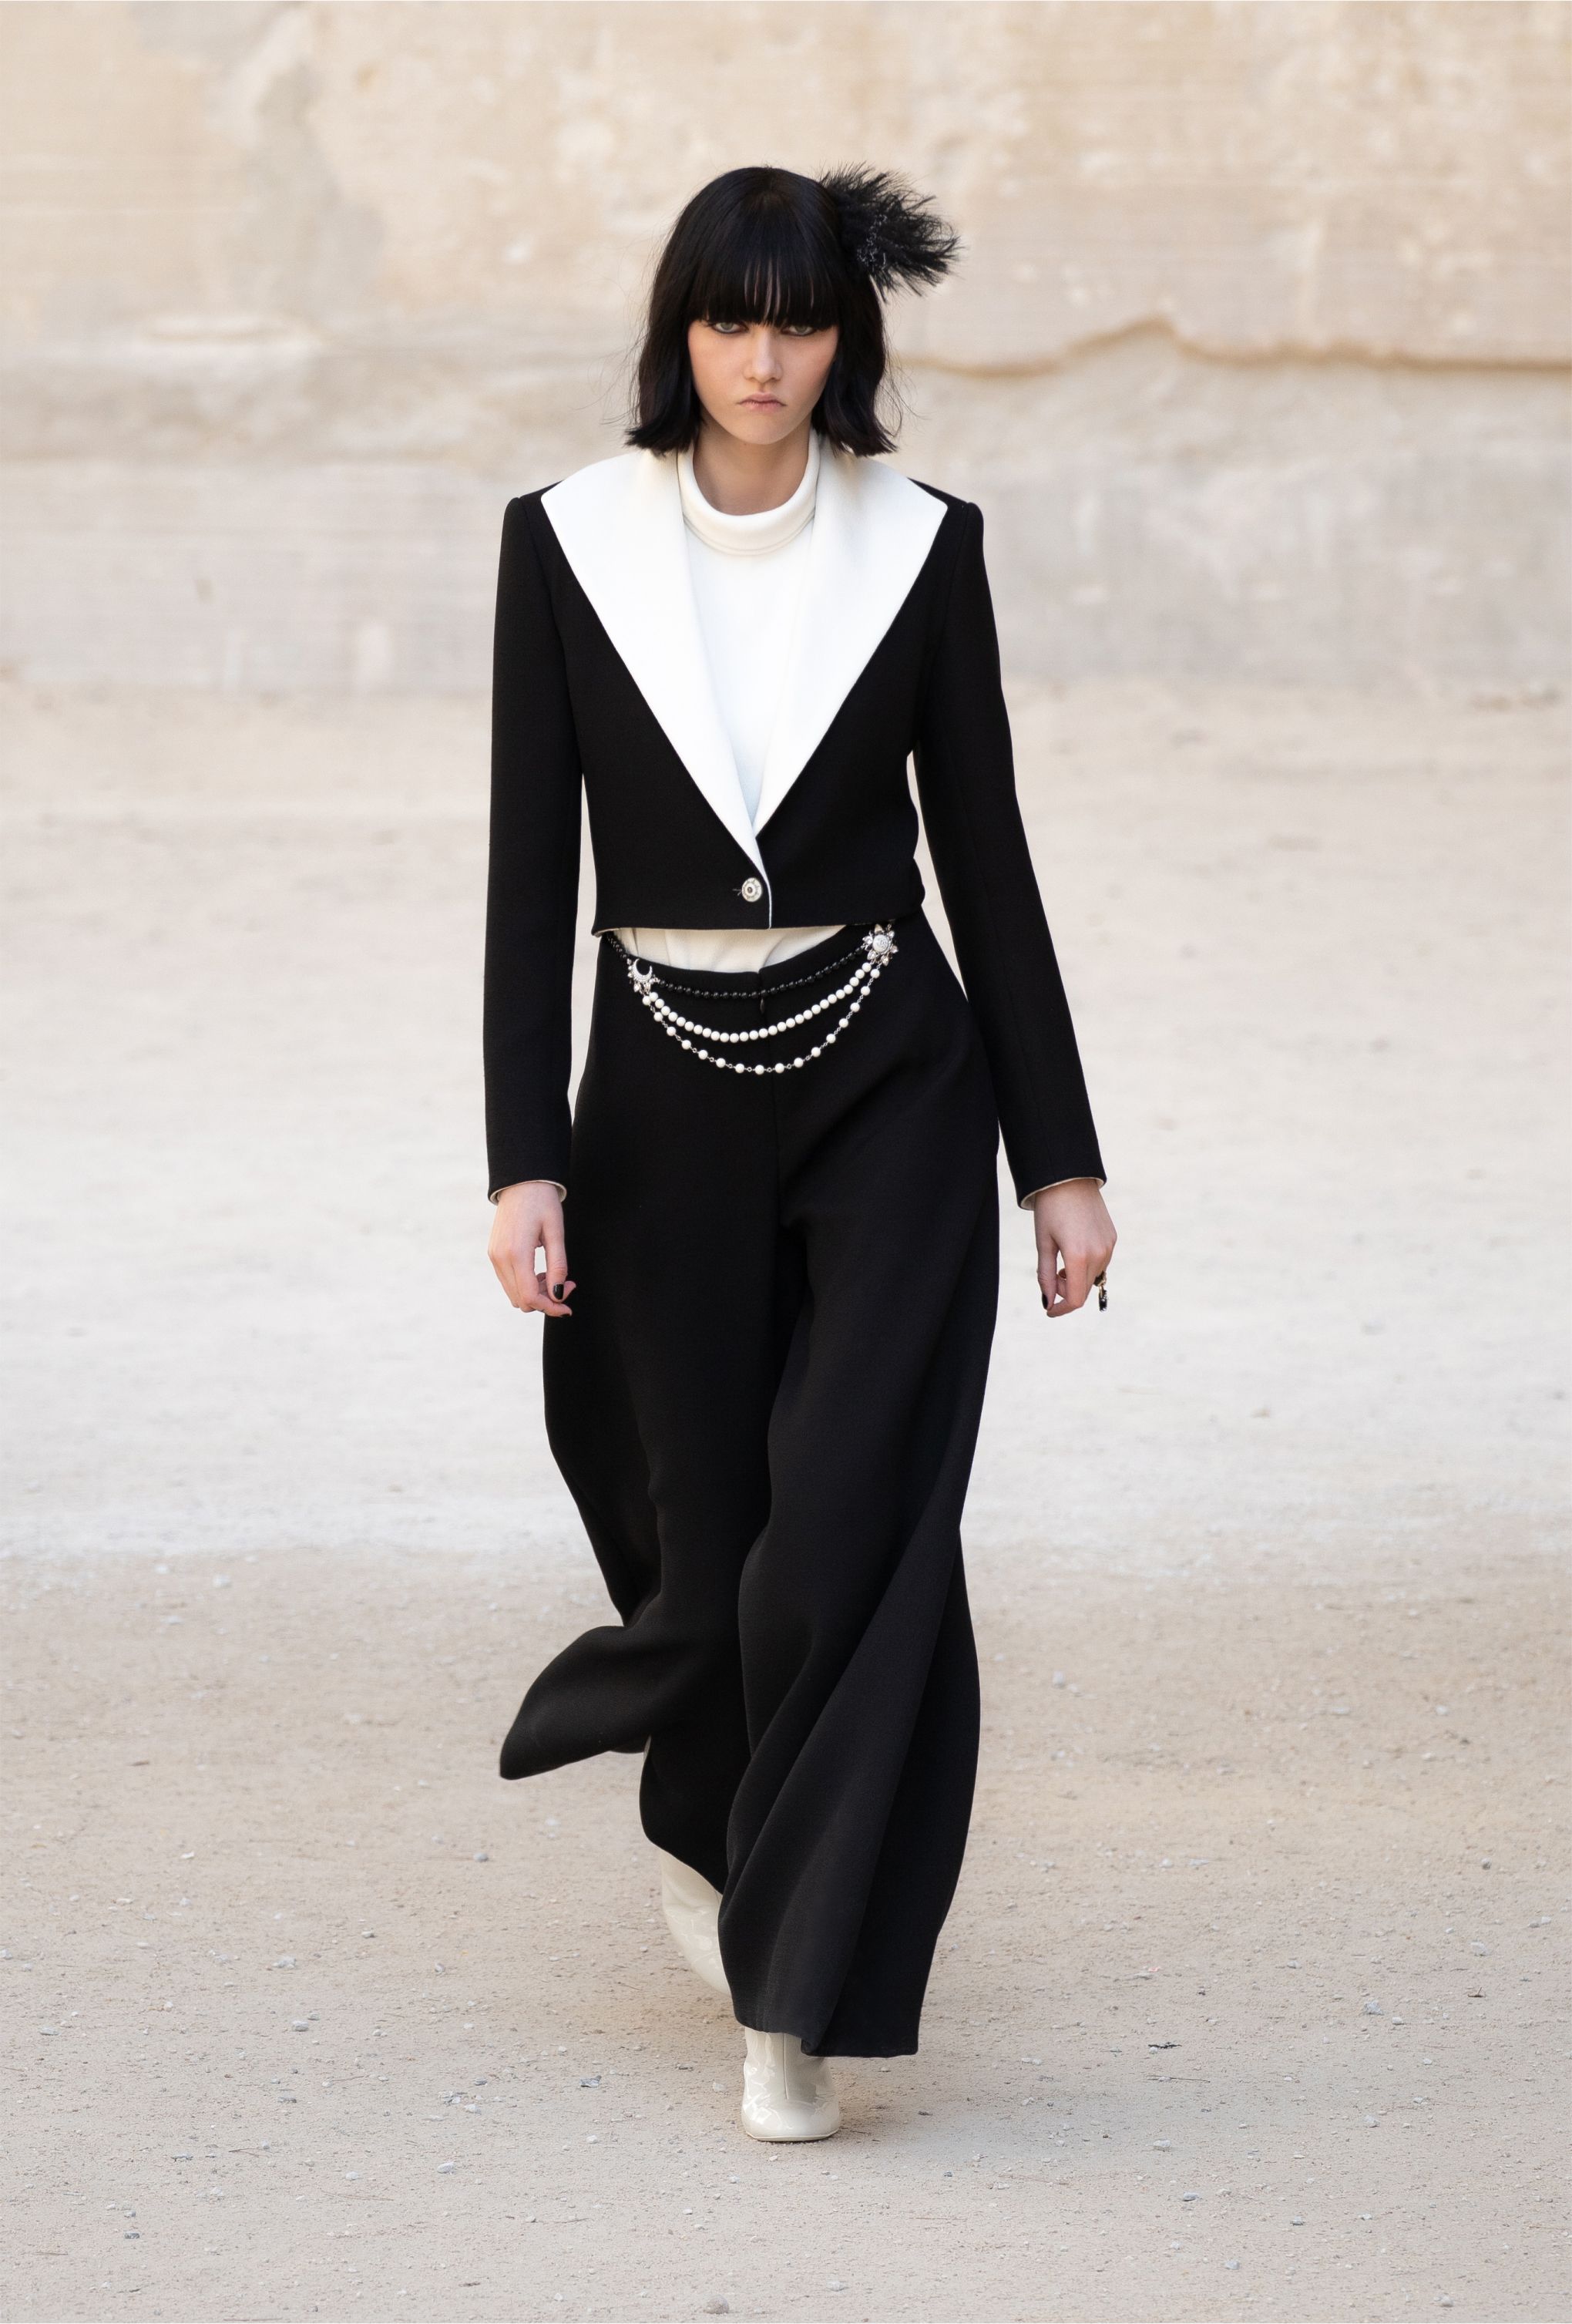 Chanel Cruise 2021 Fashion Review